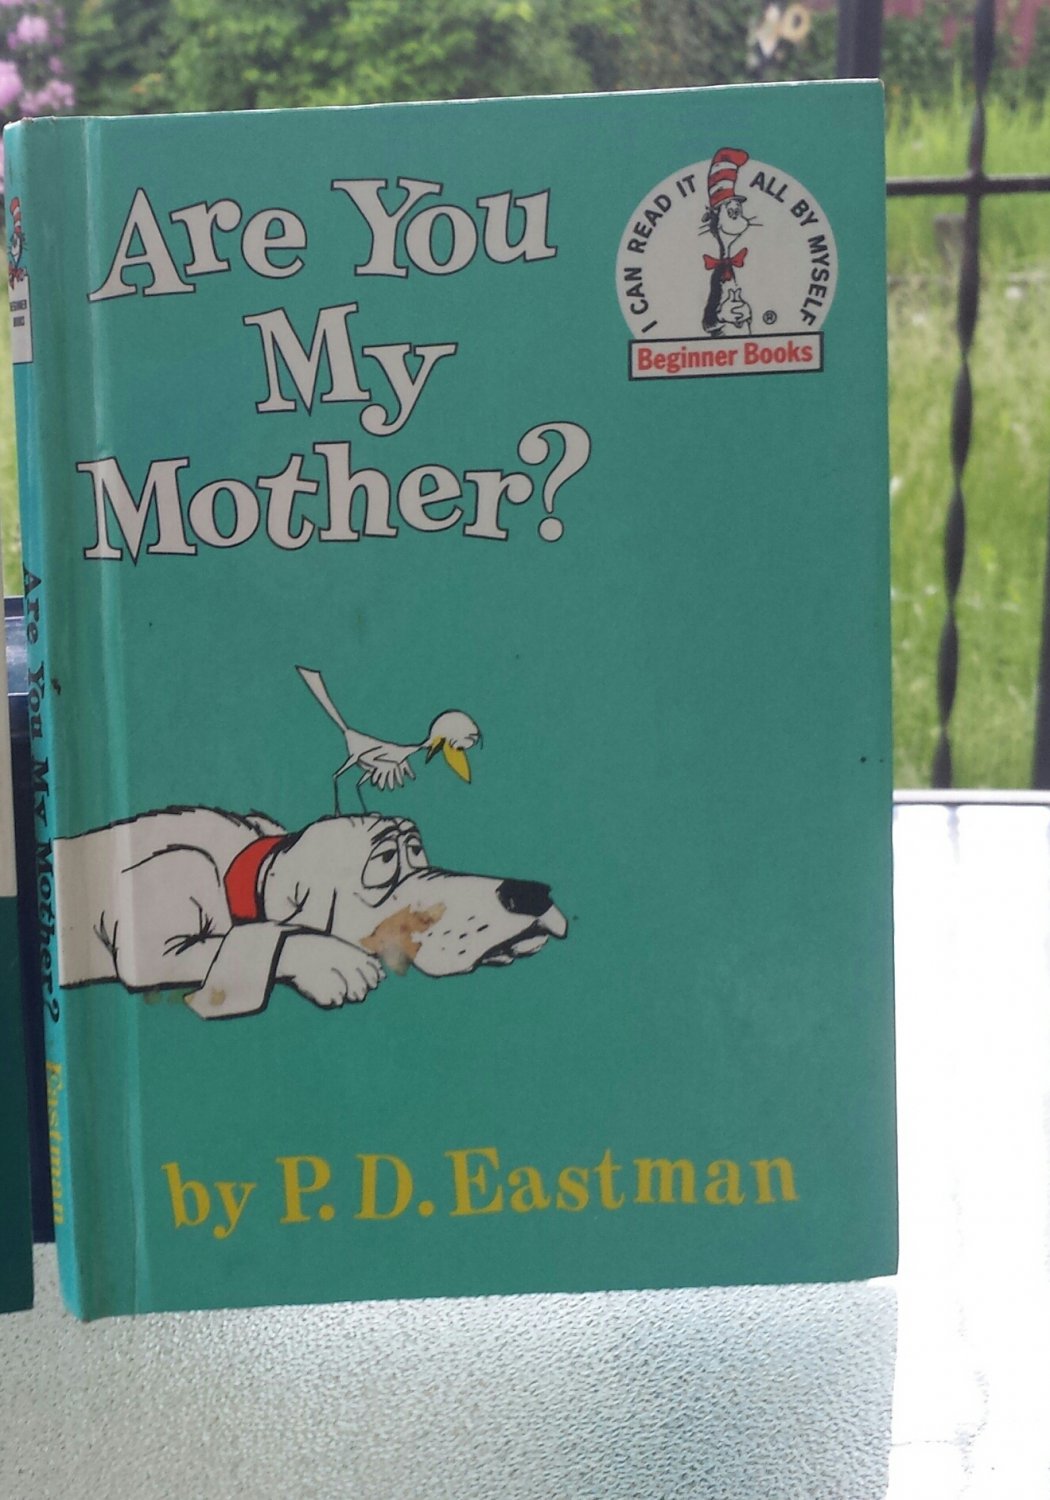 pd eastman beginner book video are you my mother